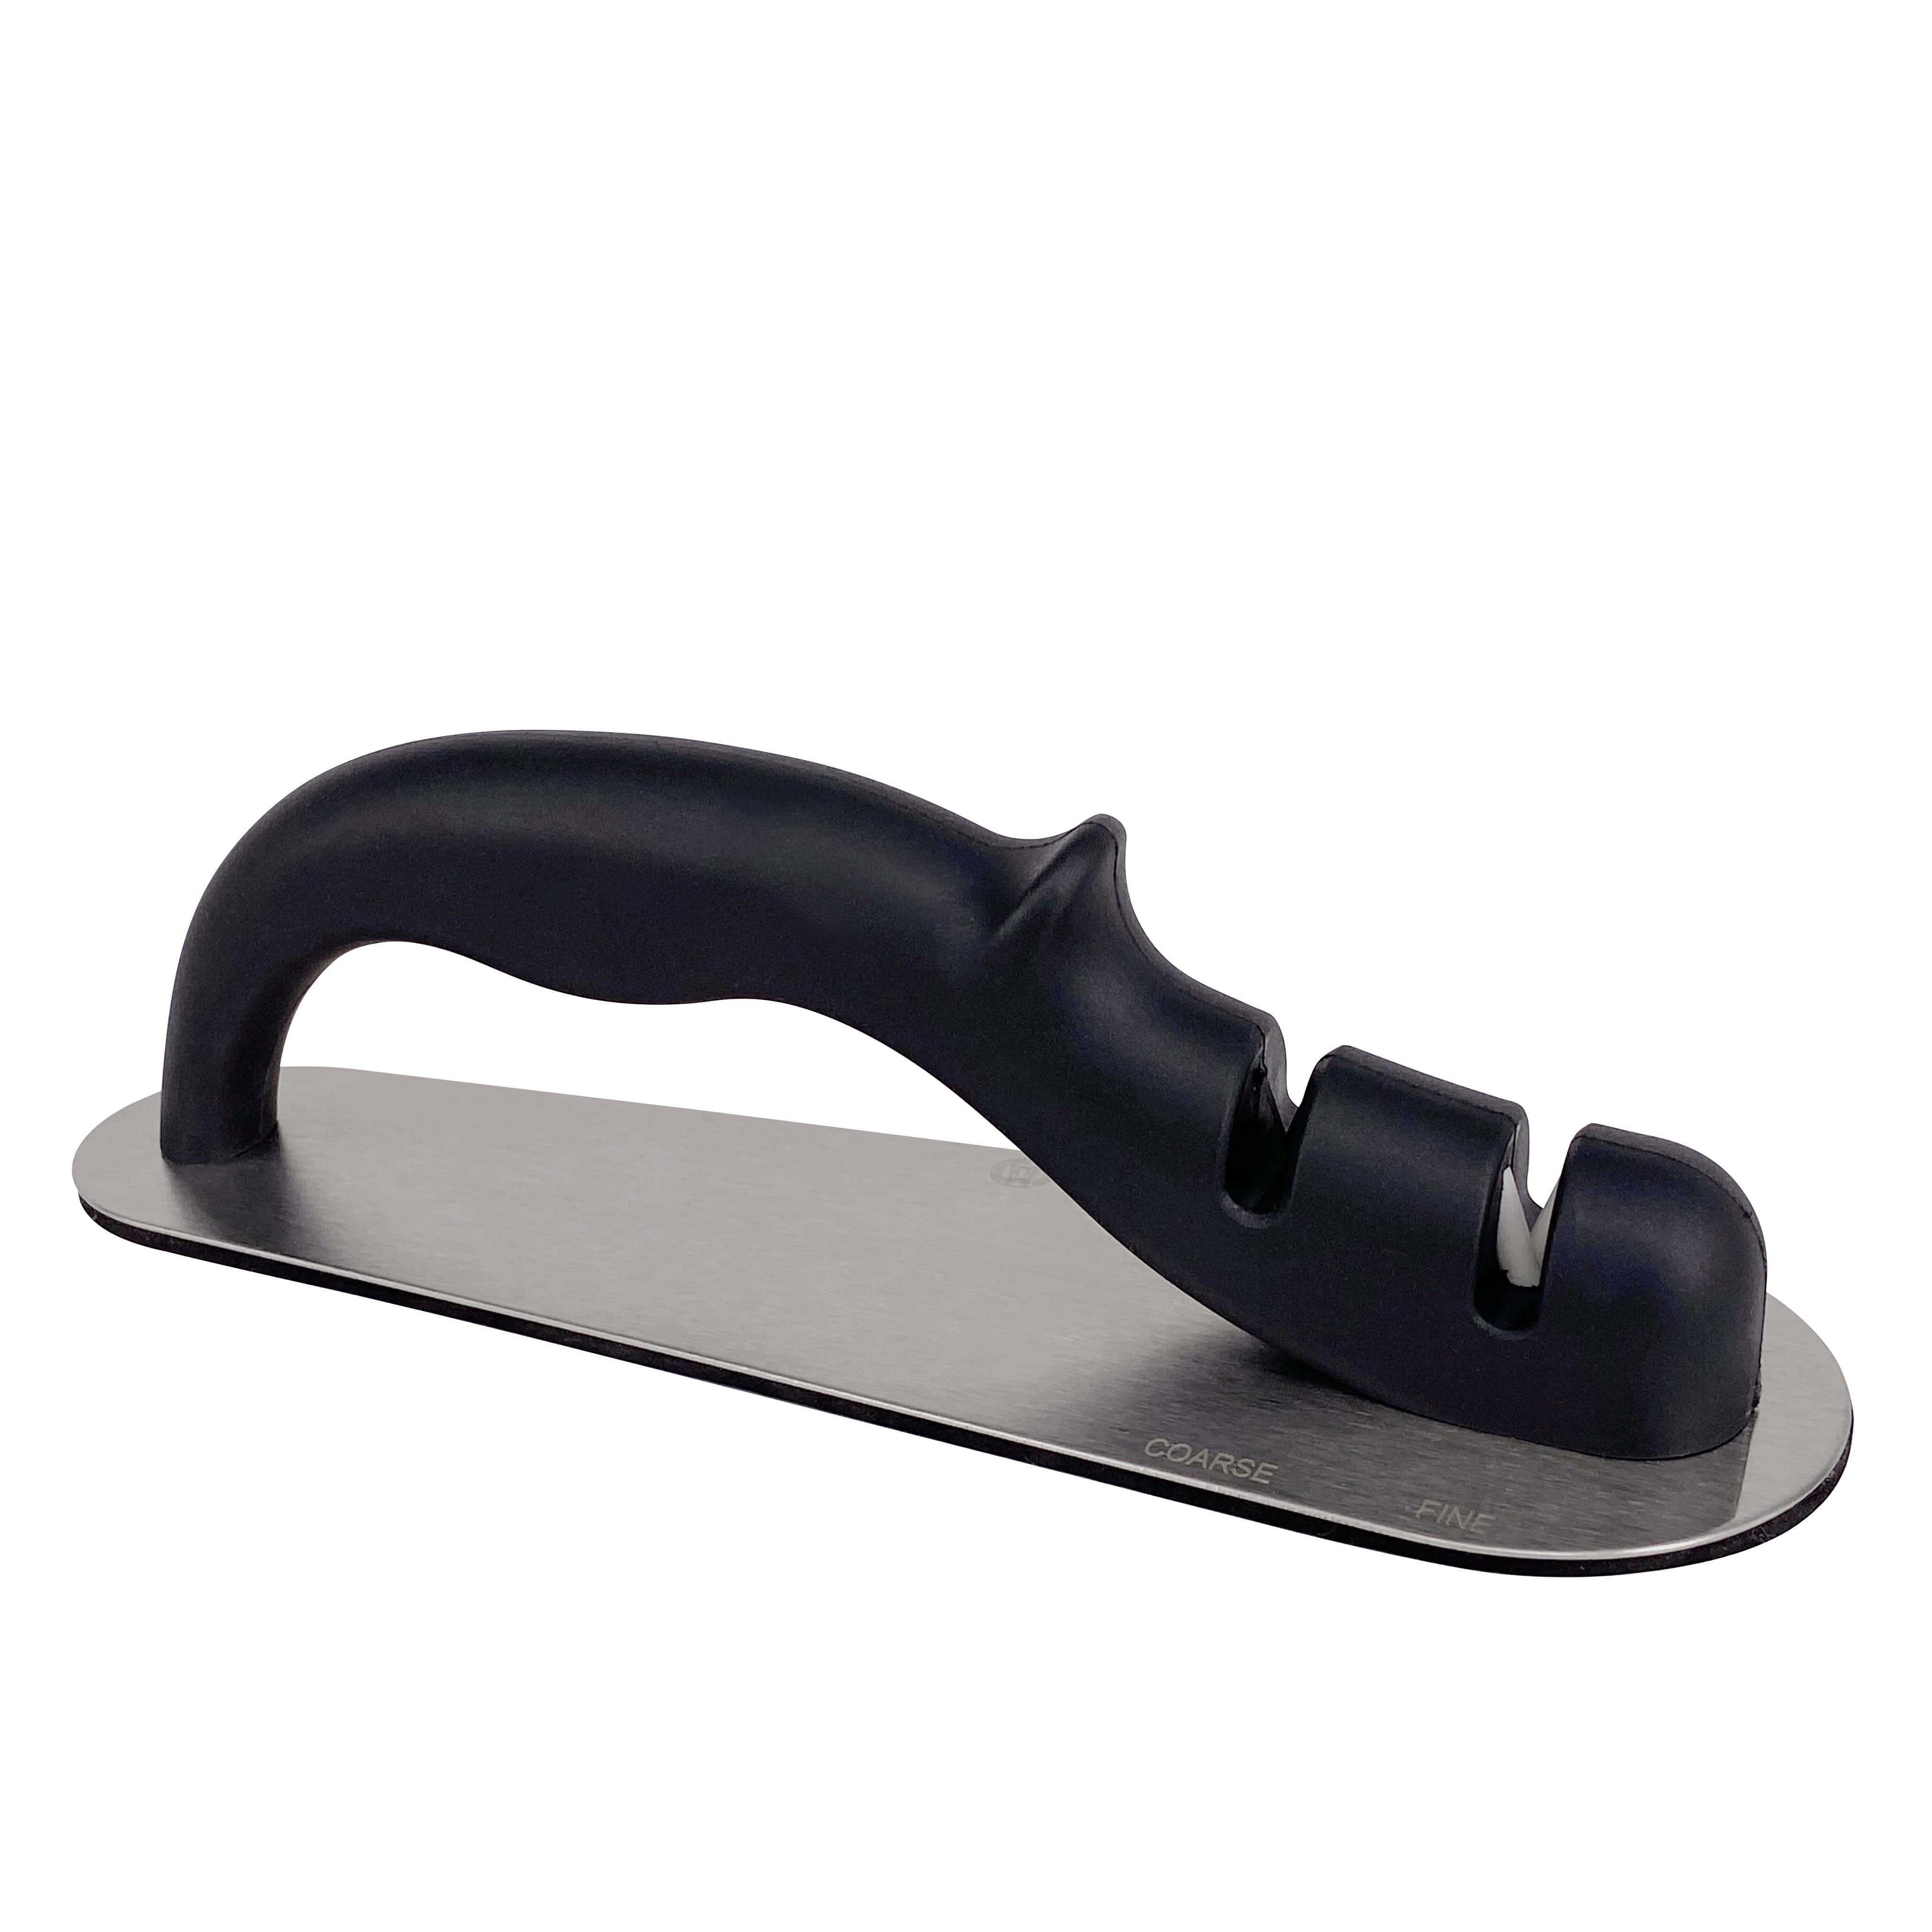 Compact Two Way Knife Sharpener - Black - Shop Now